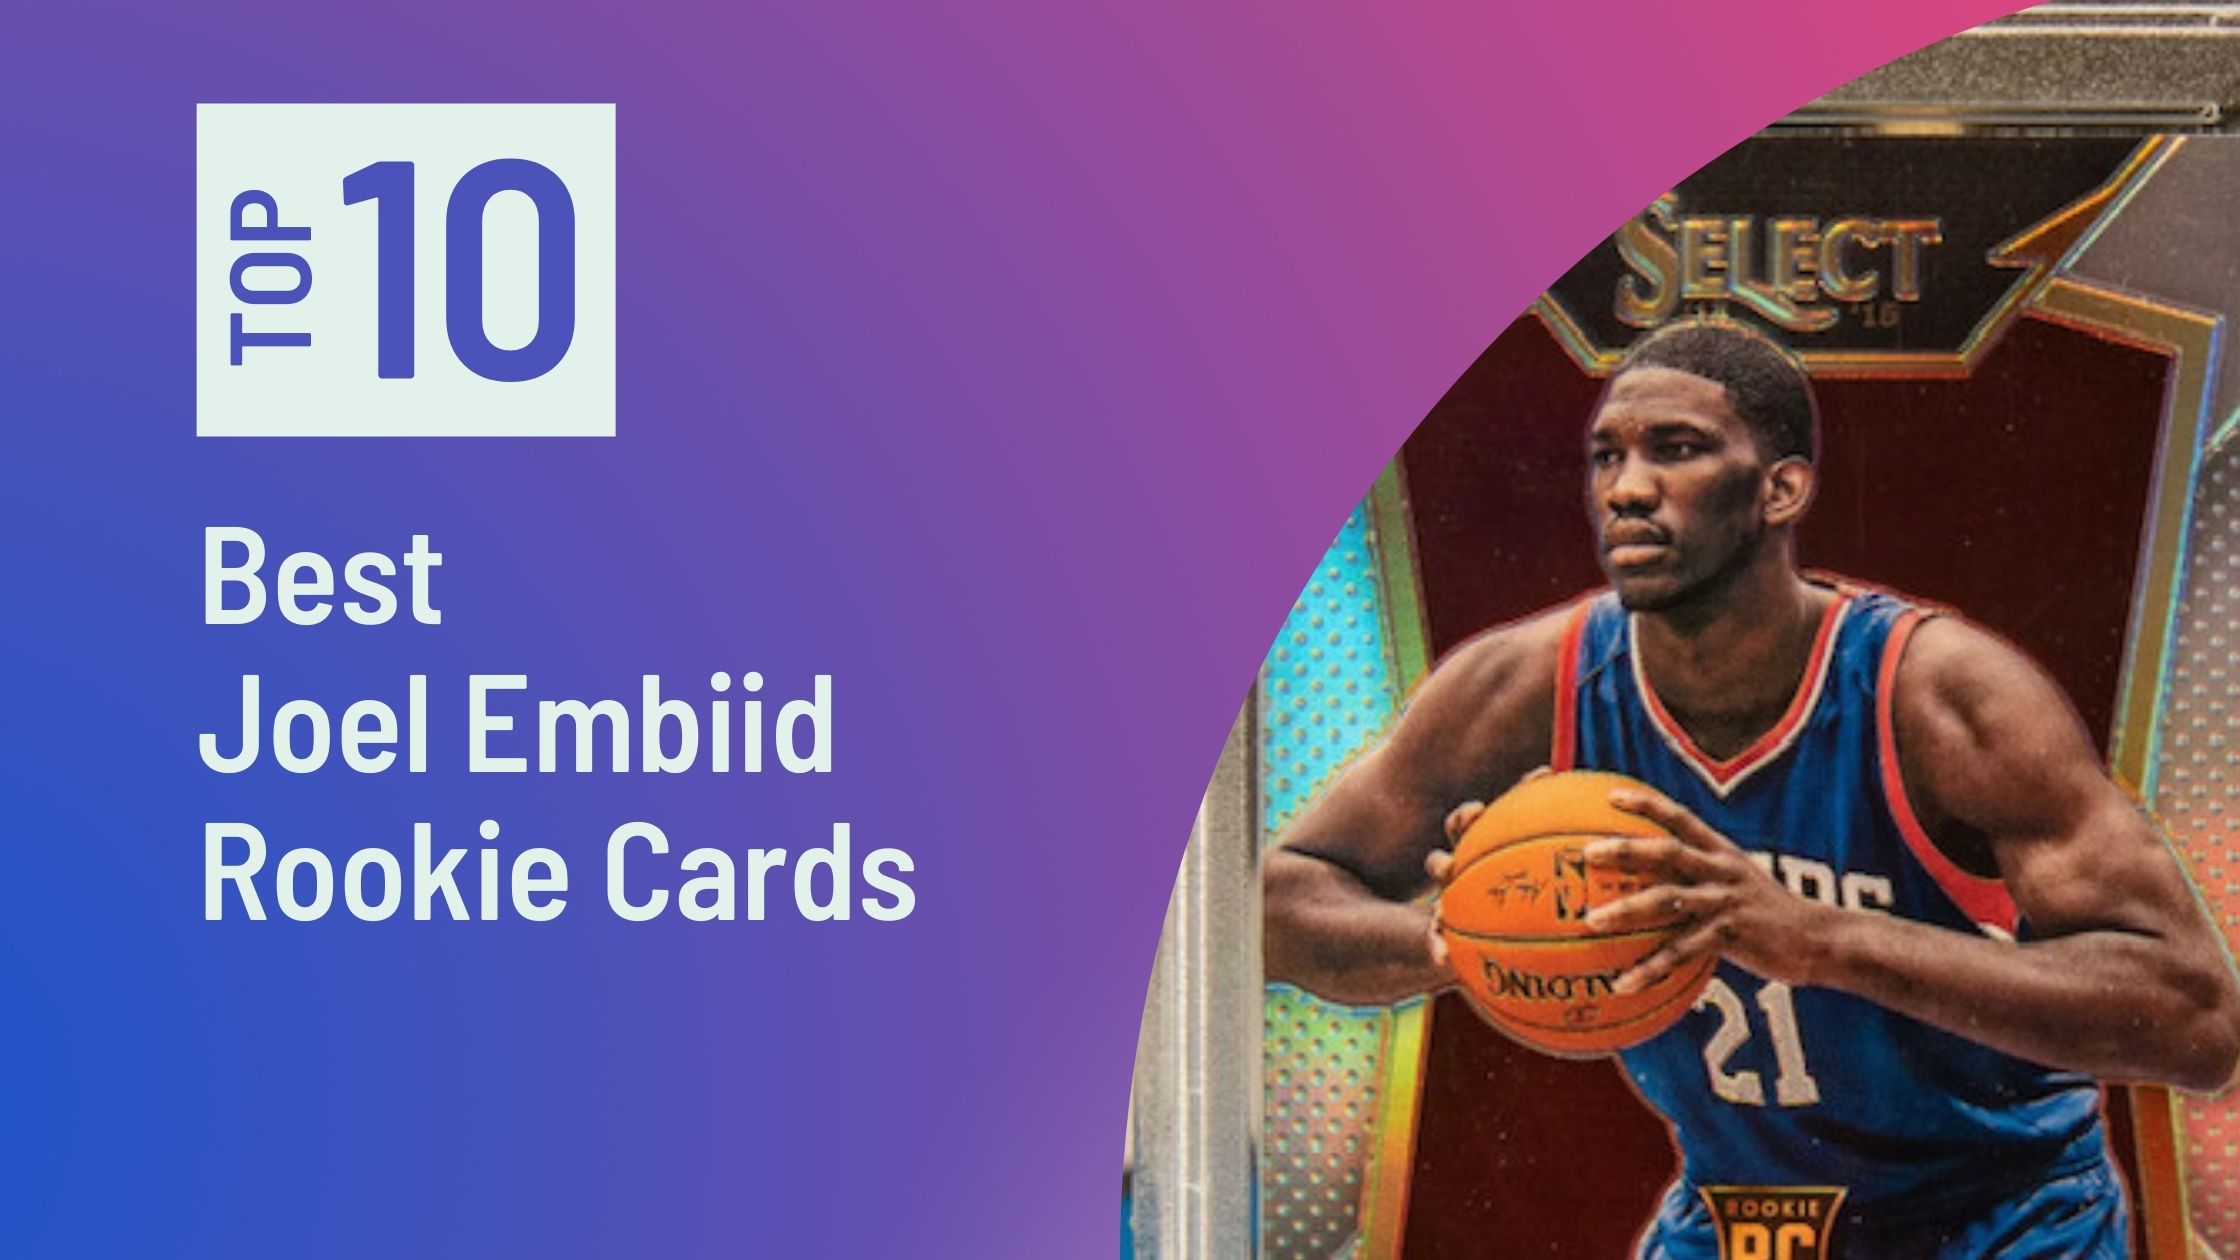 Photo of Best Joel Embiid Rookie Cards